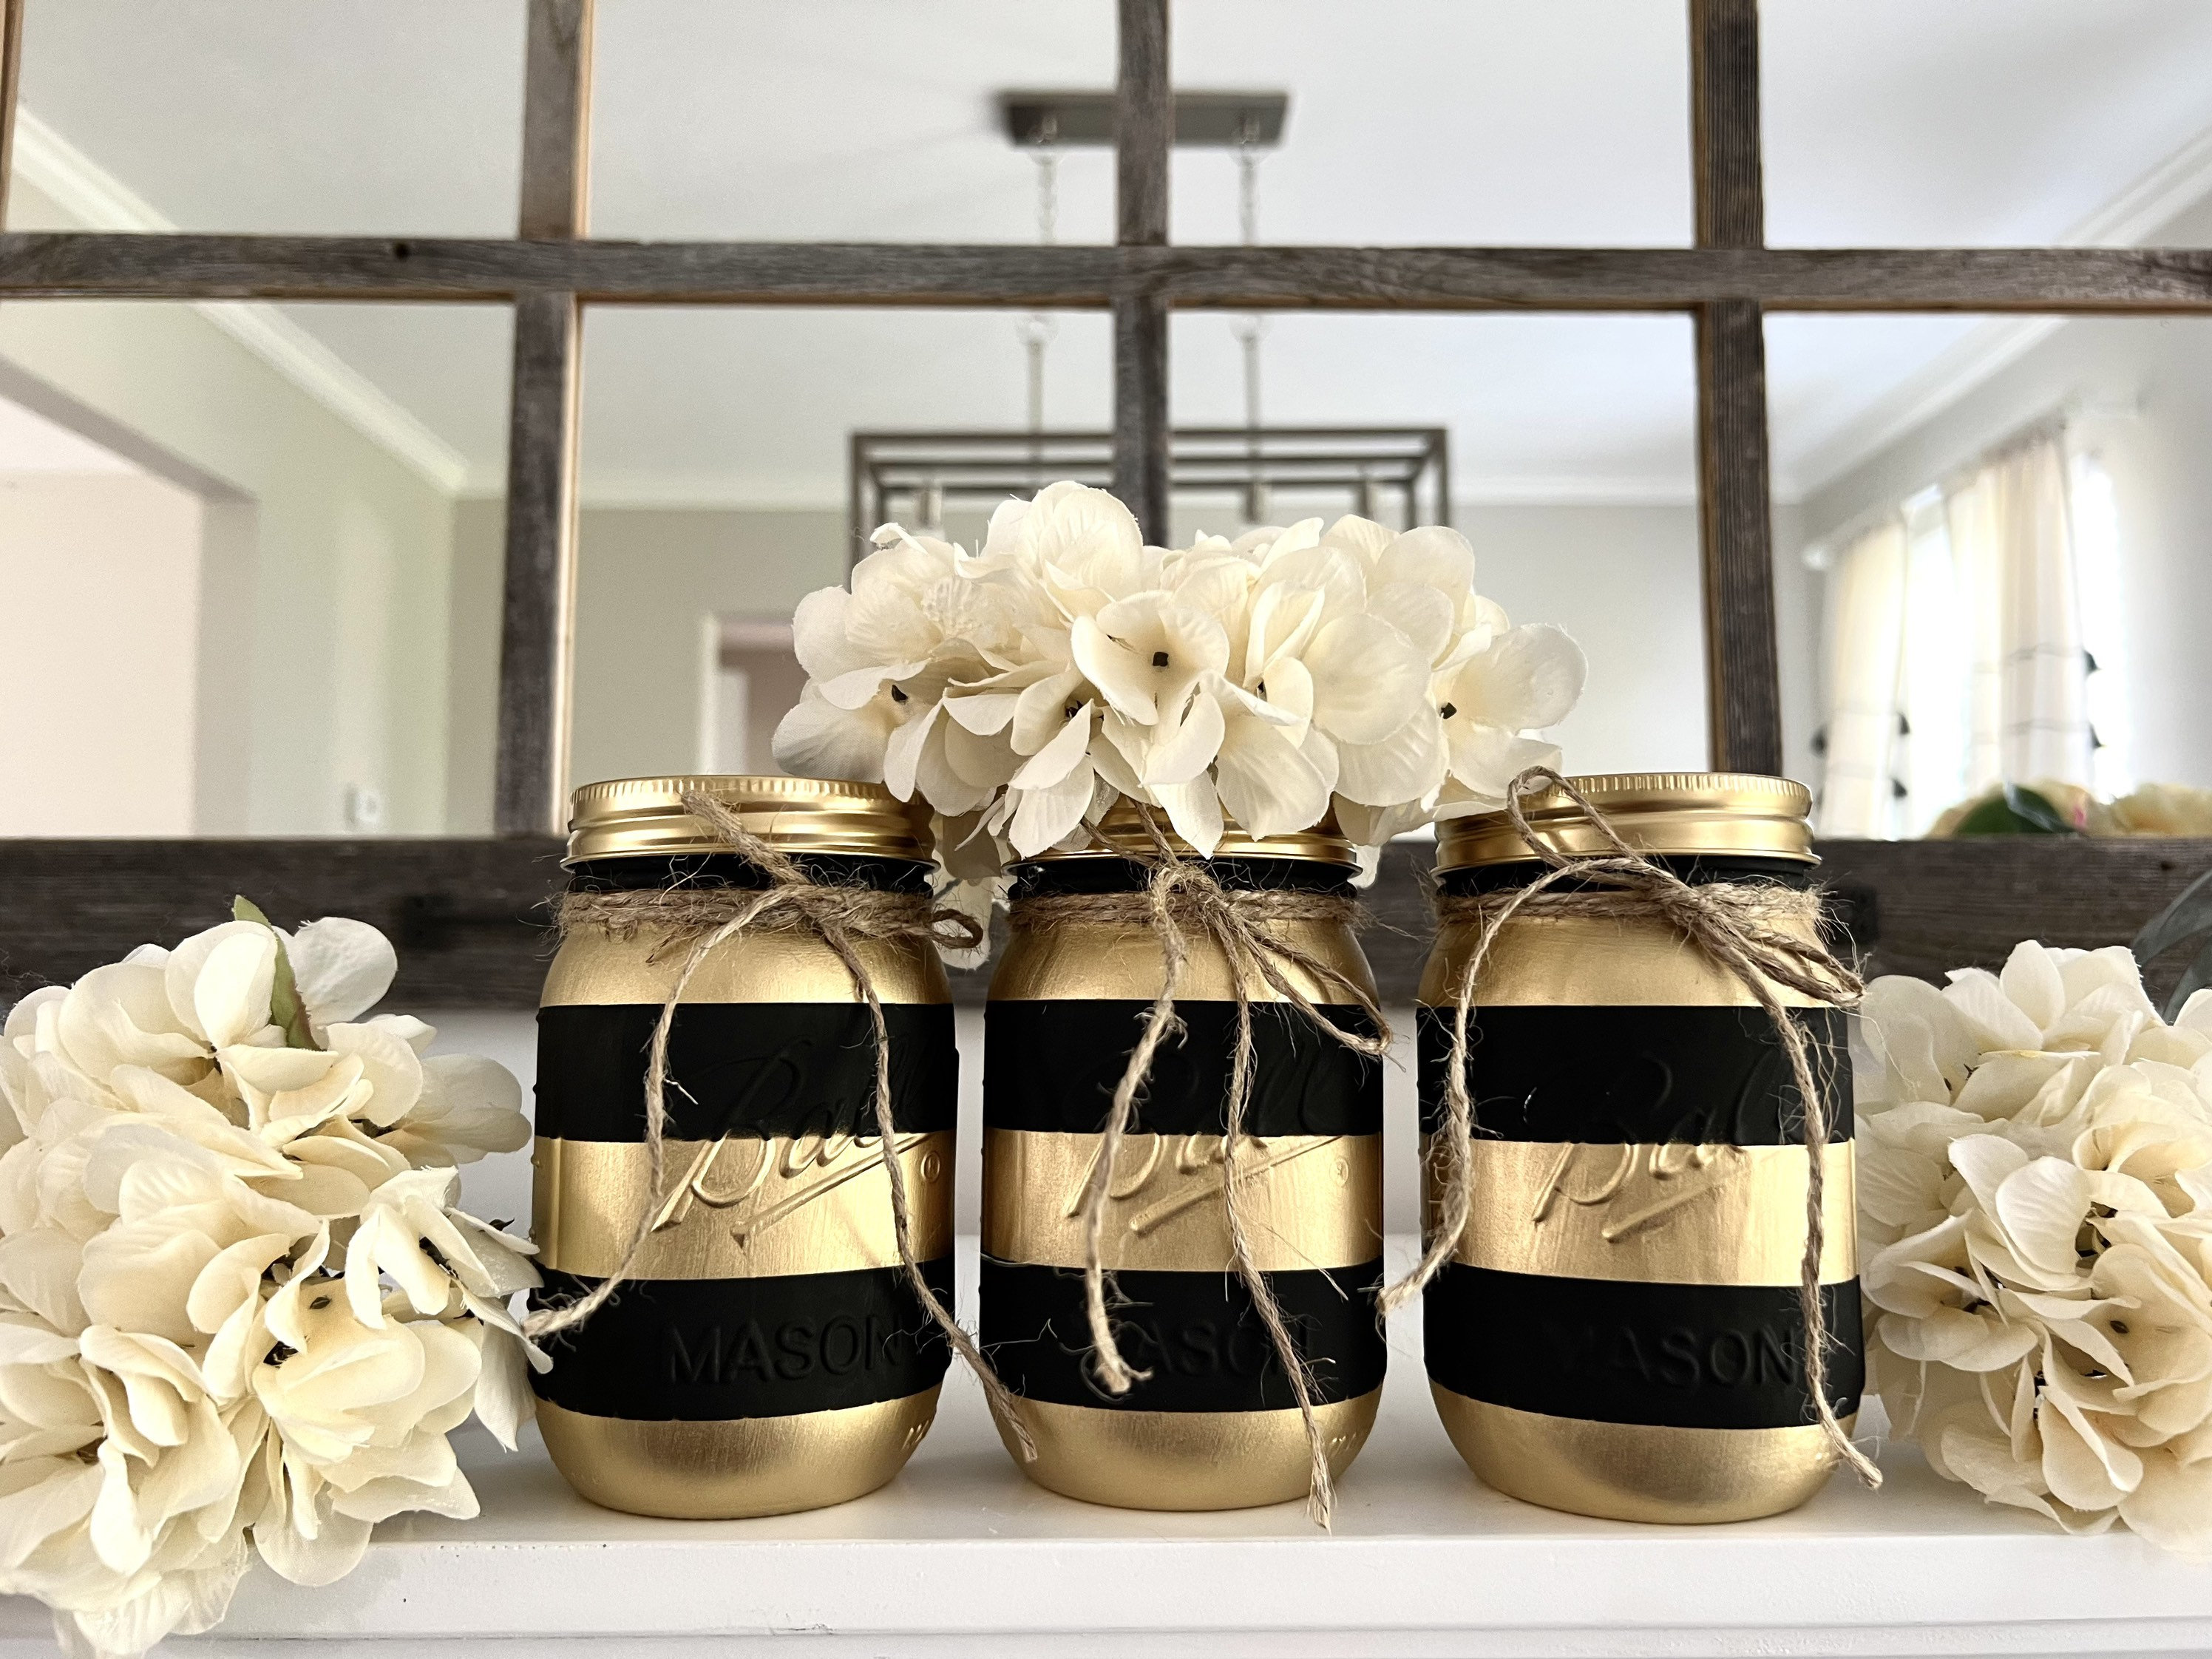 Gold Head Table Centerpiece at Black, White and Gold Themed Party Stock  Image - Image of center, arrangement: 110793927